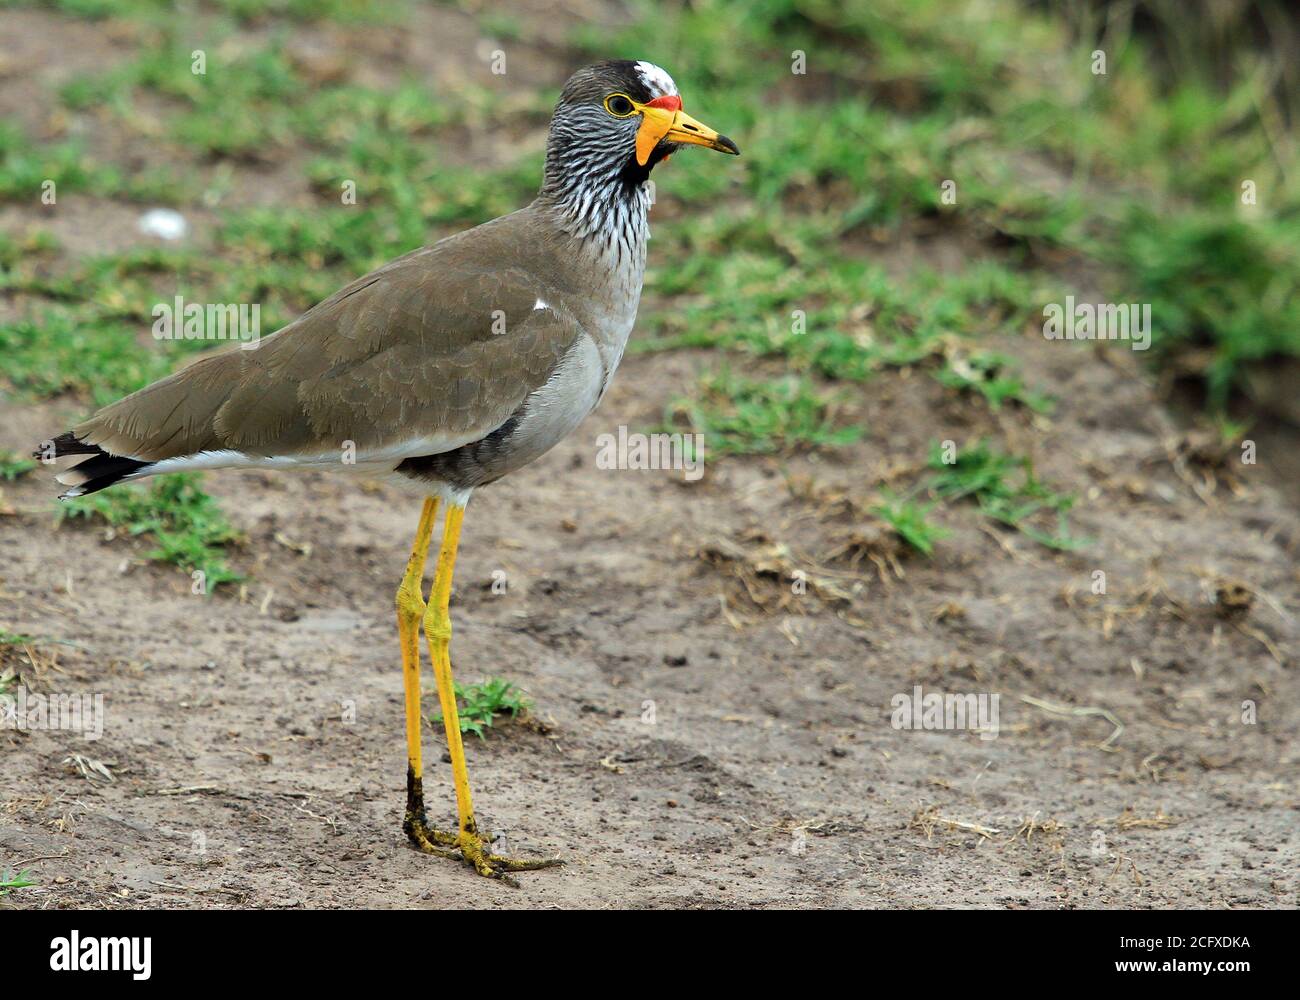 Close up of a lone colourful Wattled Lapwing (Vanellus senegallus) standing on the ground in Masai Mara, Kenya Stock Photo